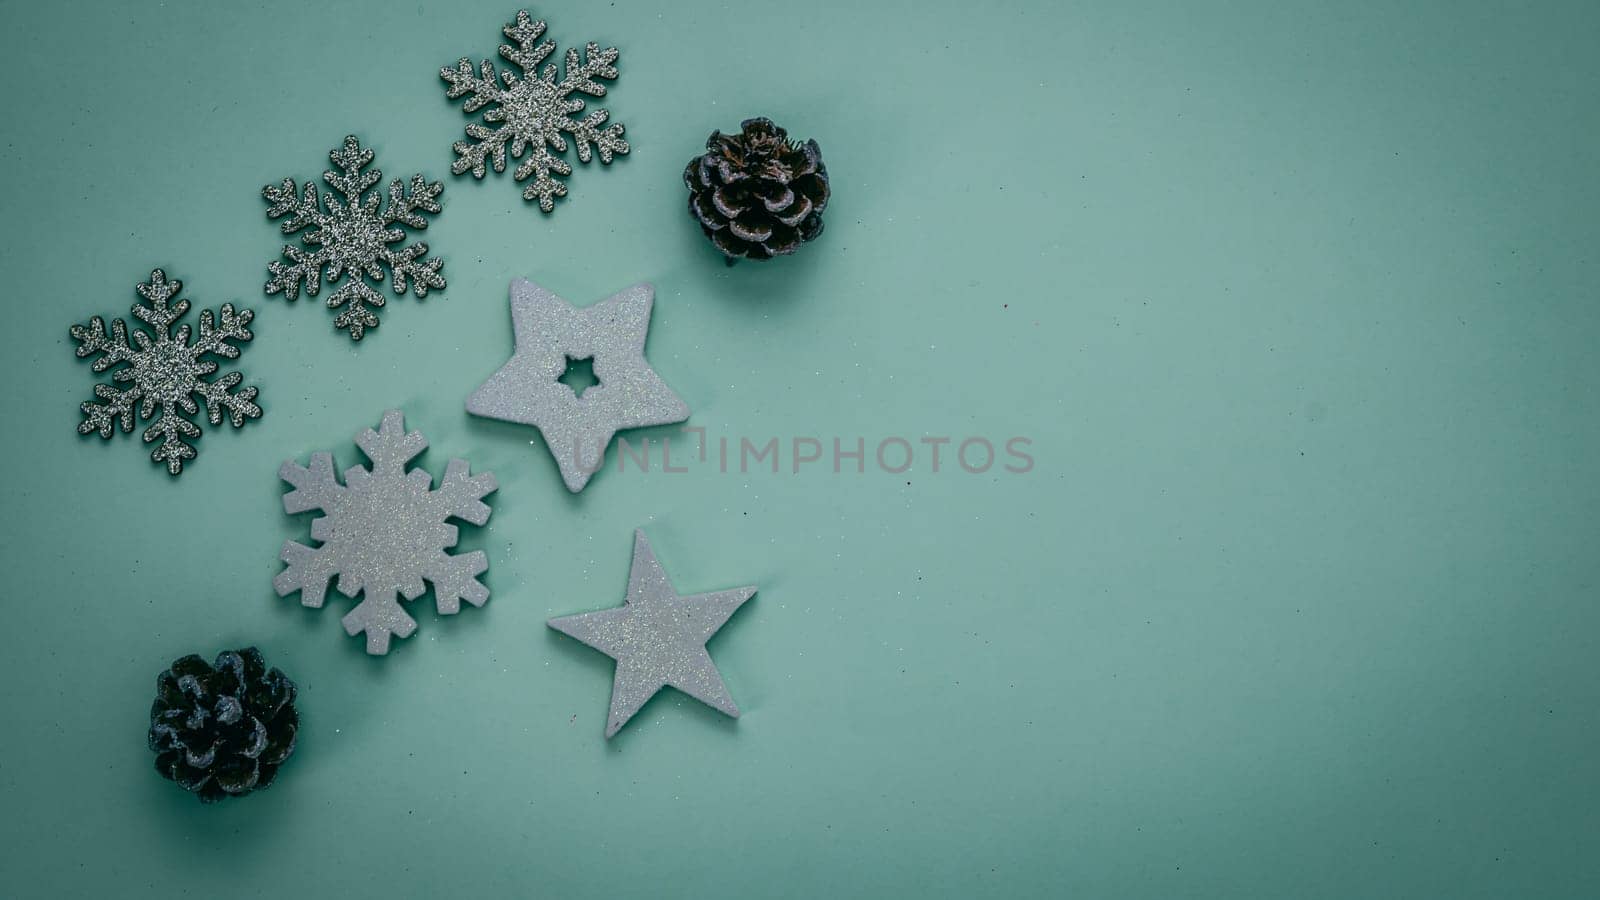 Christmas decorations. Colorful Christmas lights background by vladispas